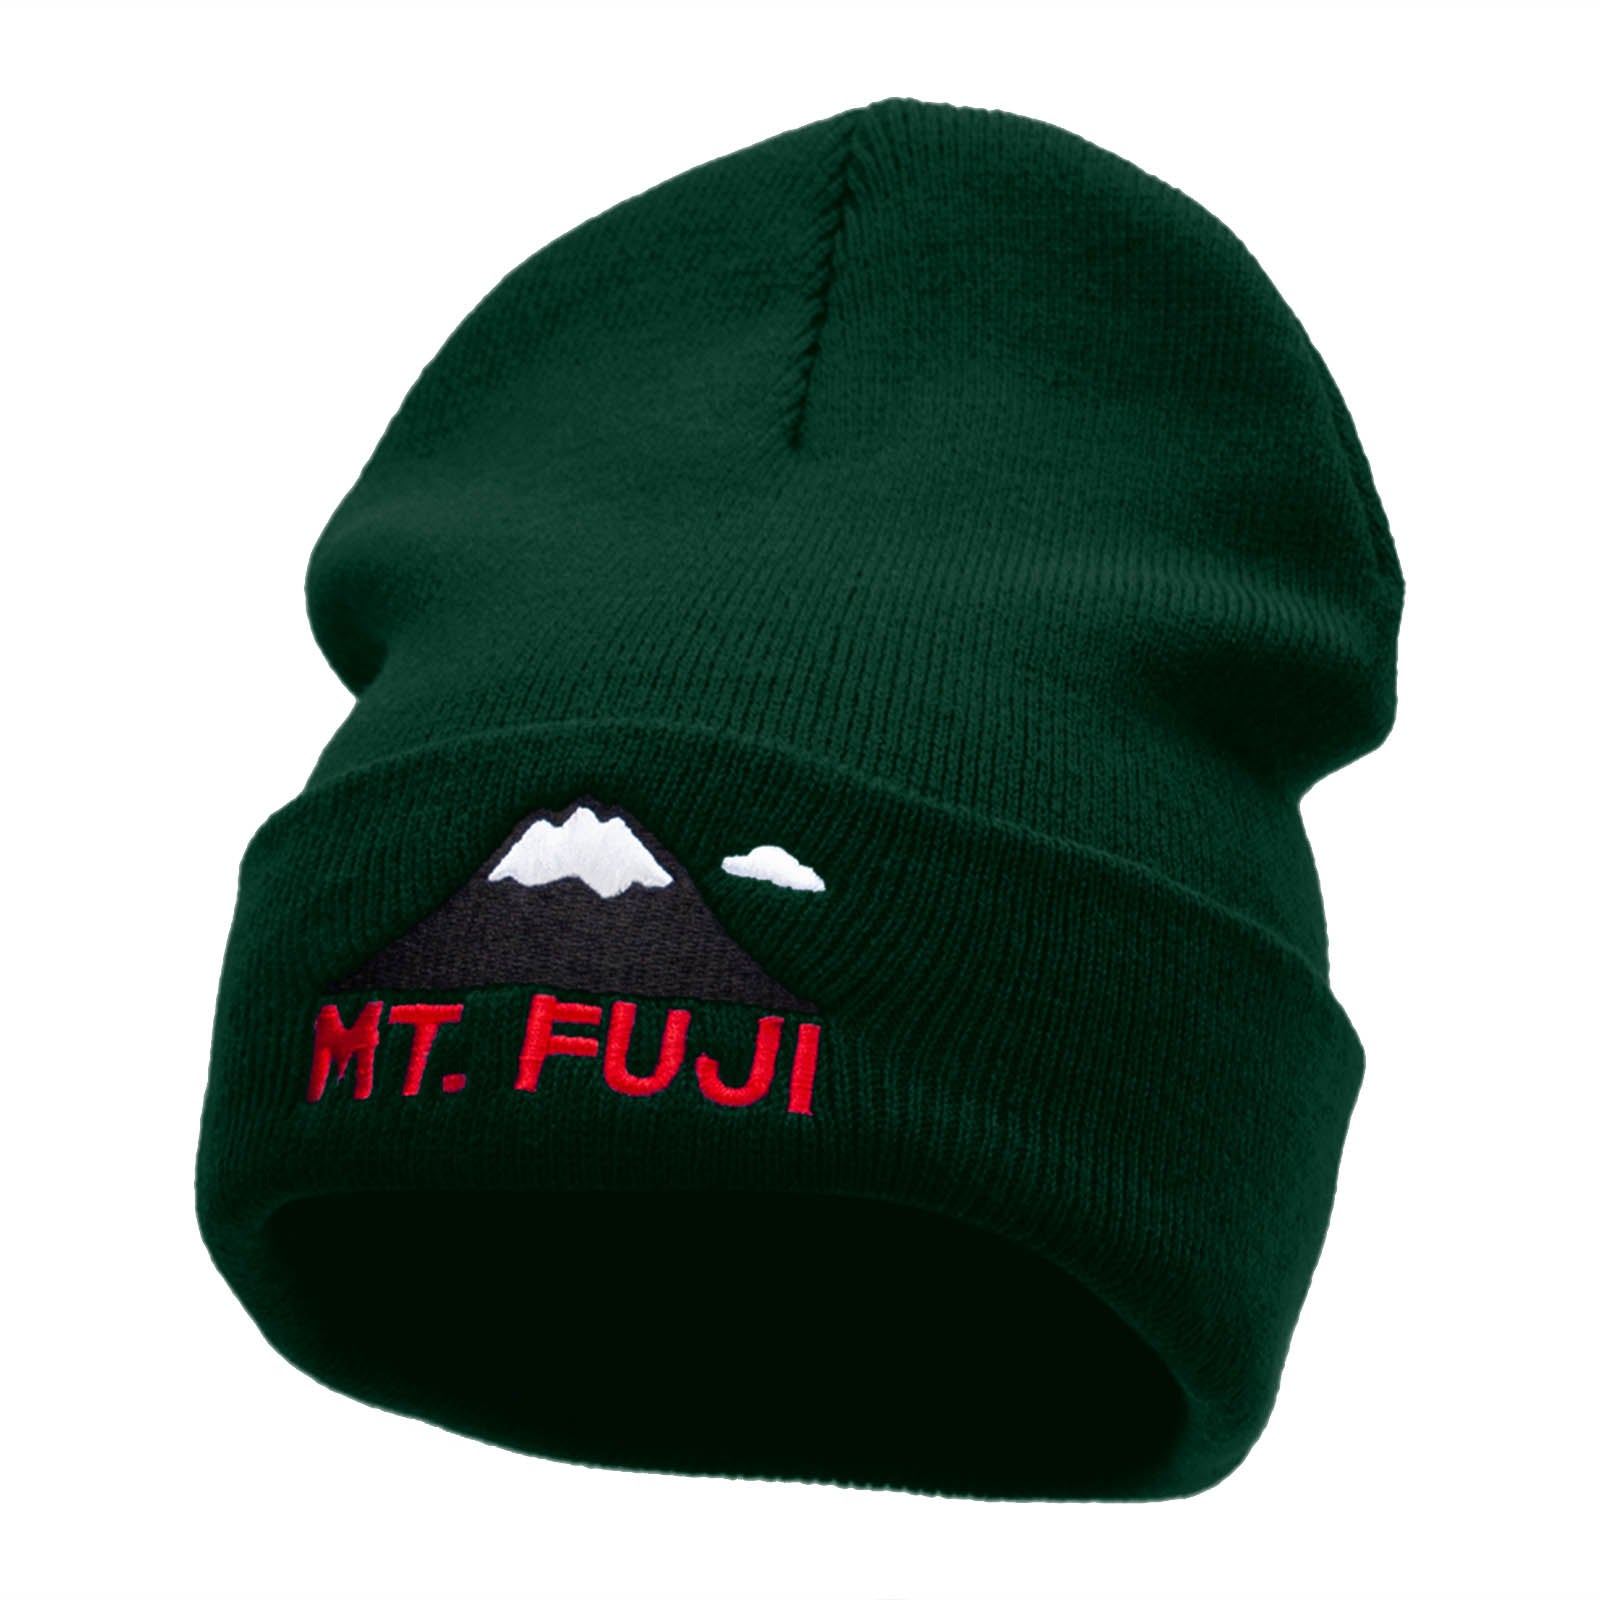 Mount Fuji Embroidered 12 Inch Long Knitted Beanie - Dk Green OSFM